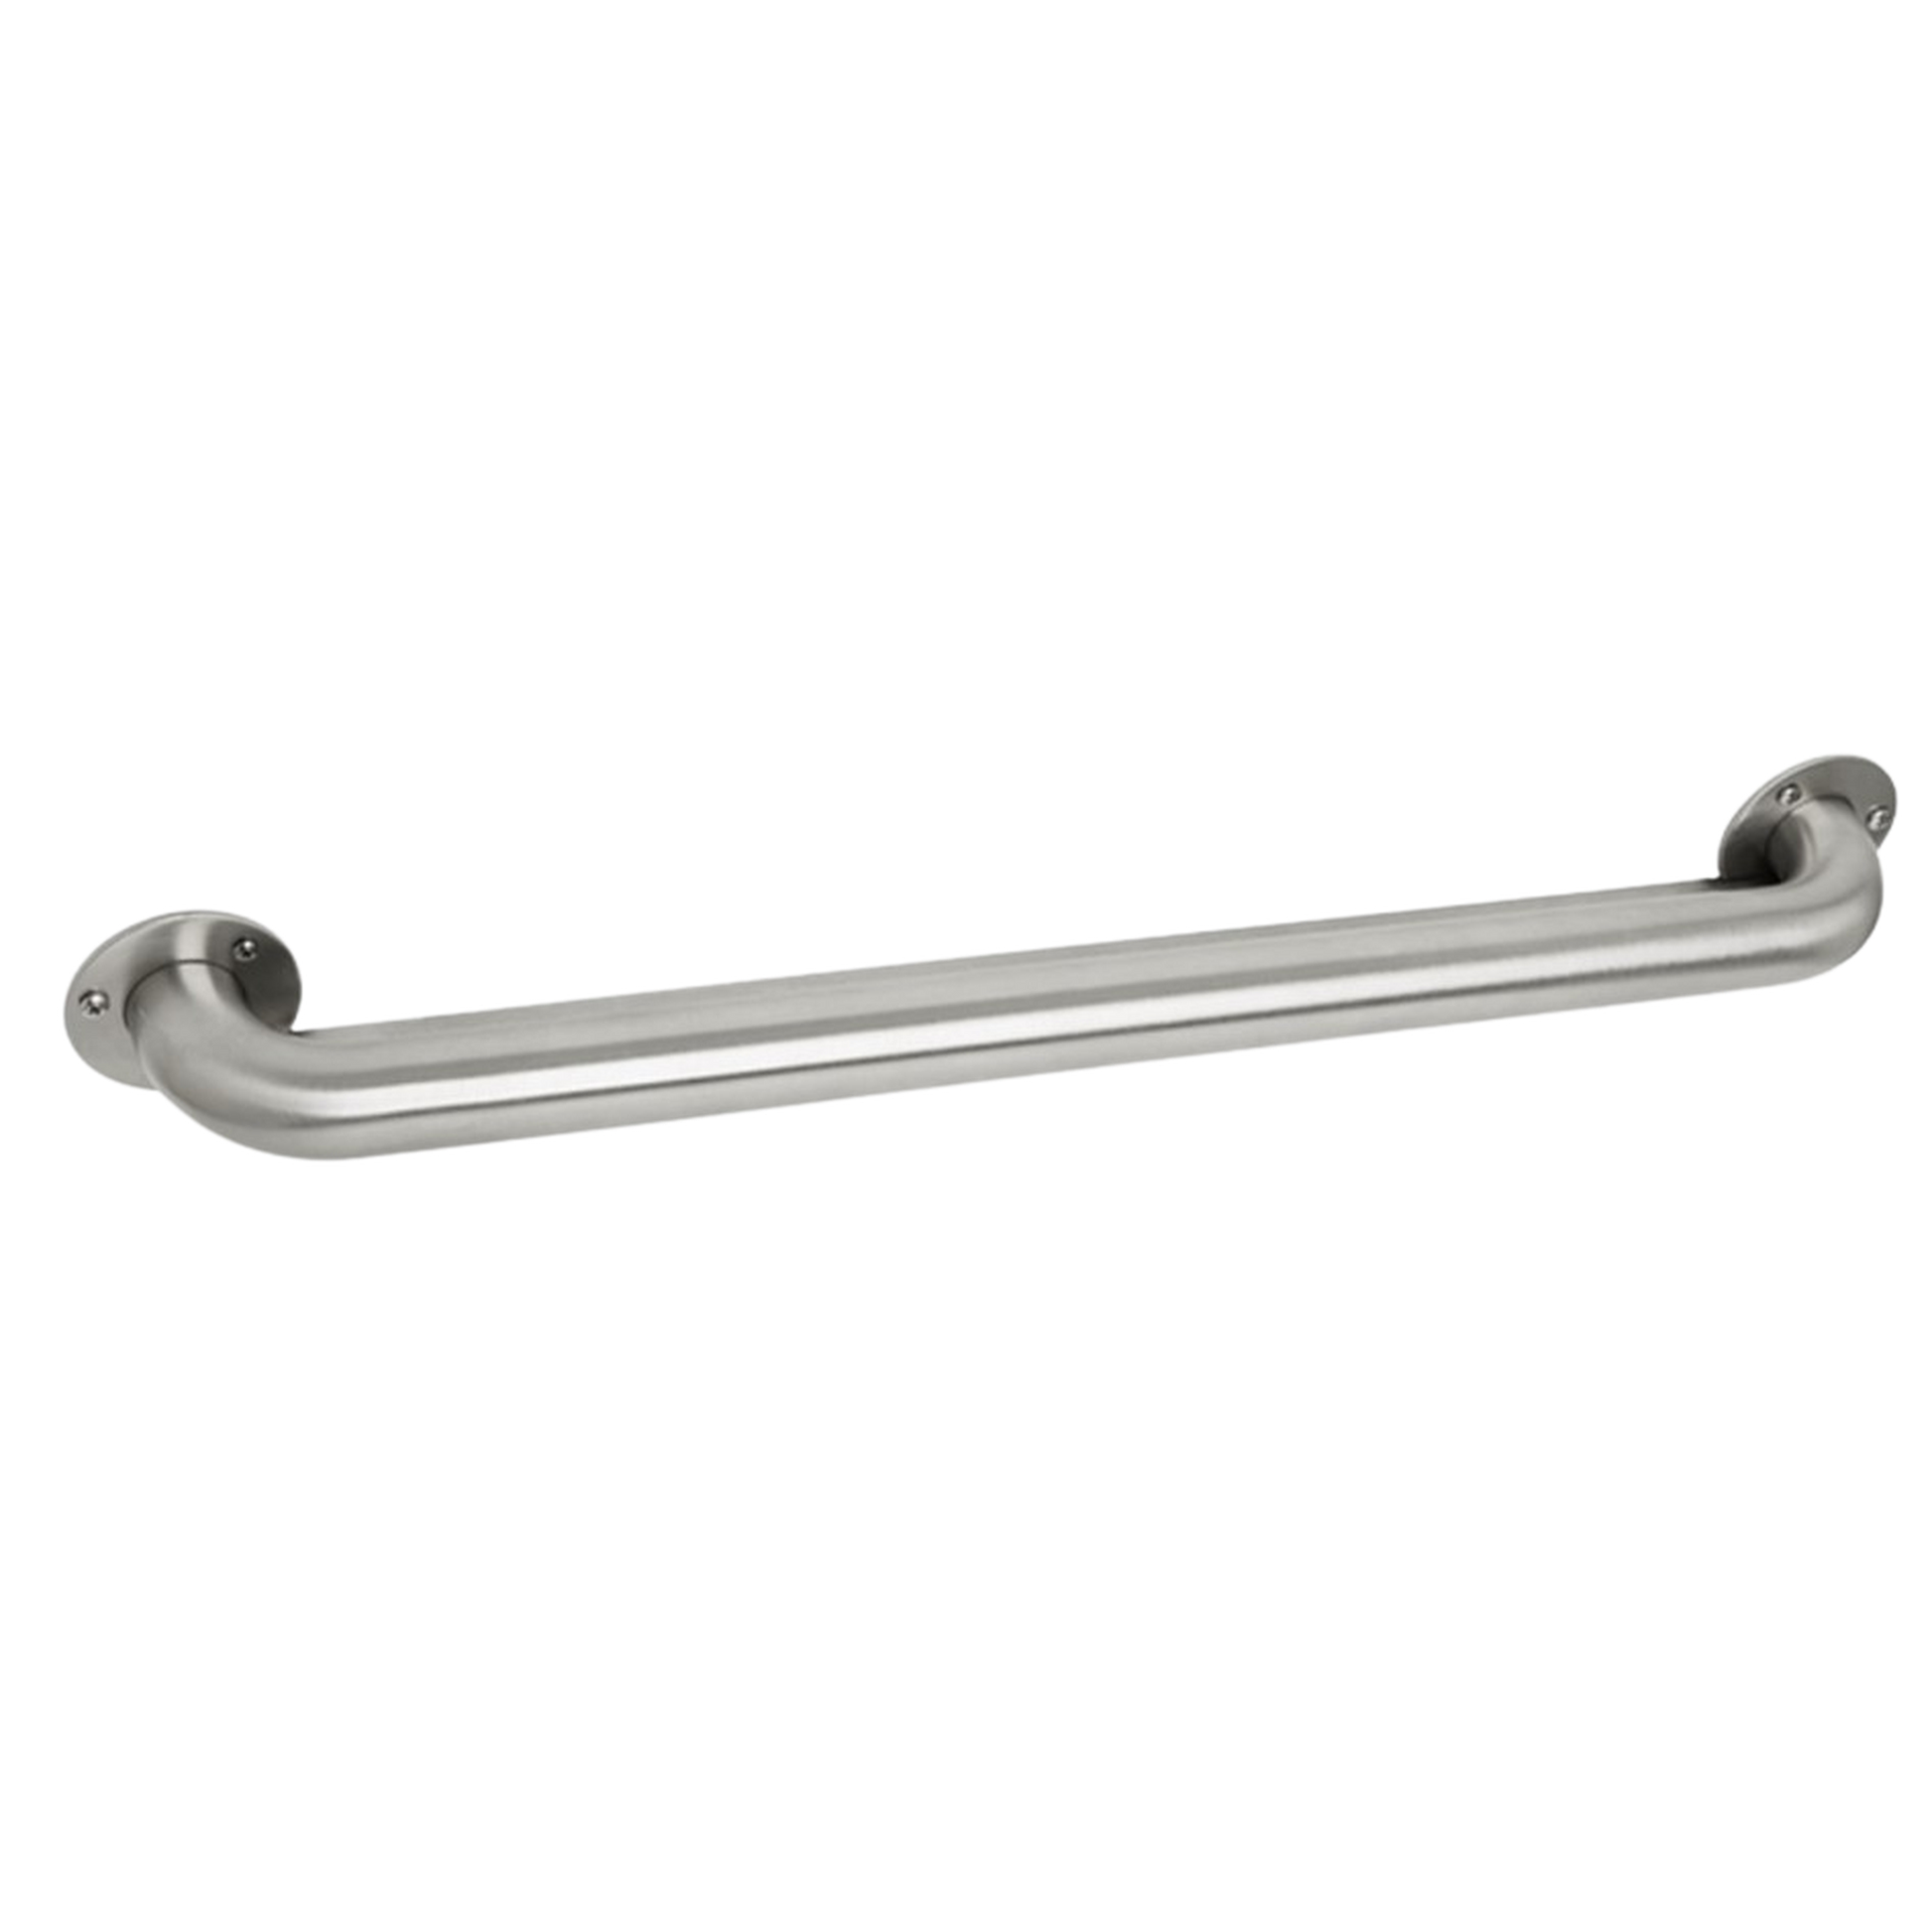 Seachrome Signature Series 16" Satin Stainless Steel 1.5 Diameter Exposed 3-Hole Mounting Flange Switch Weld Standard Ligature Resistant Grab Bar